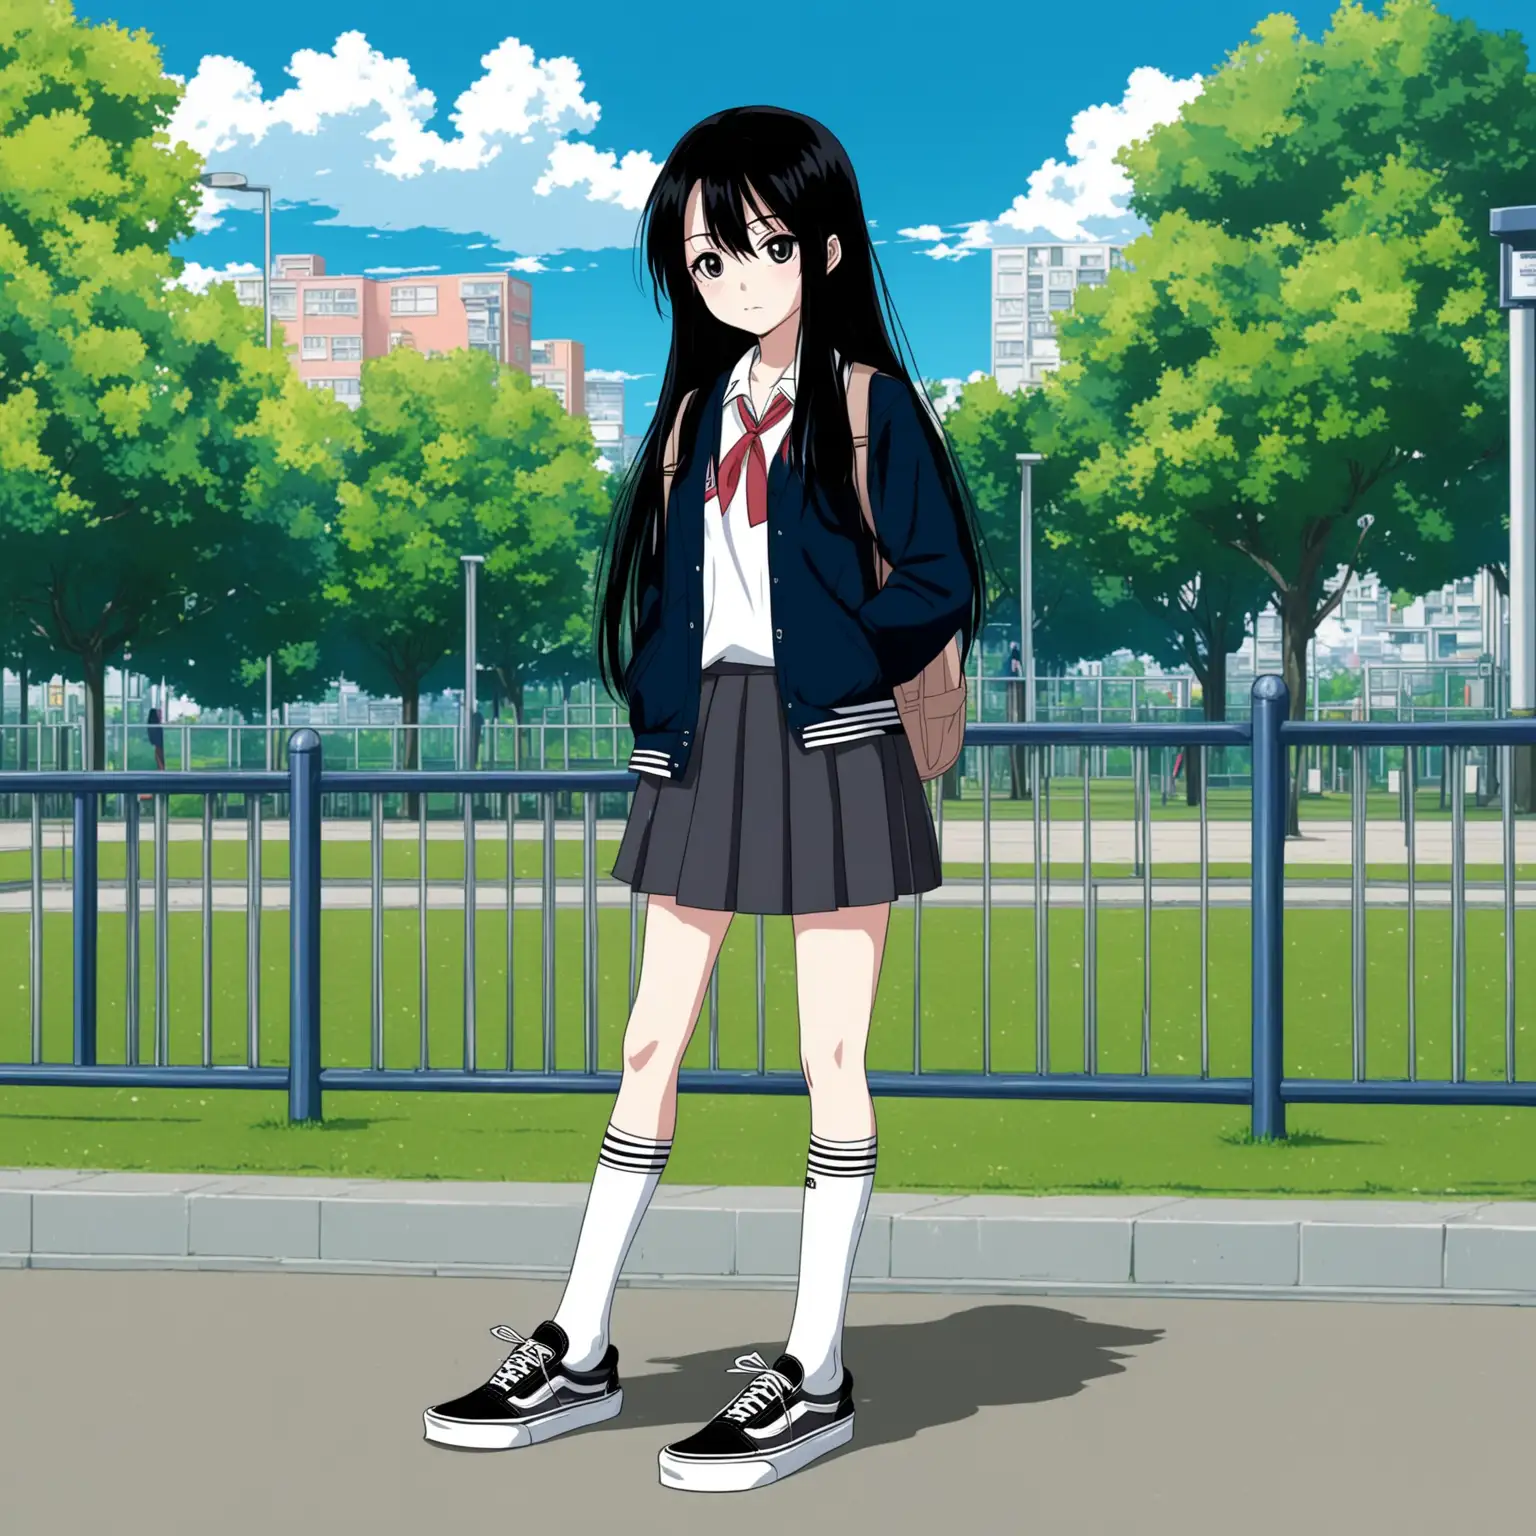 Anime-Girl-in-School-Uniform-Standing-in-Park-with-Long-Black-Hair